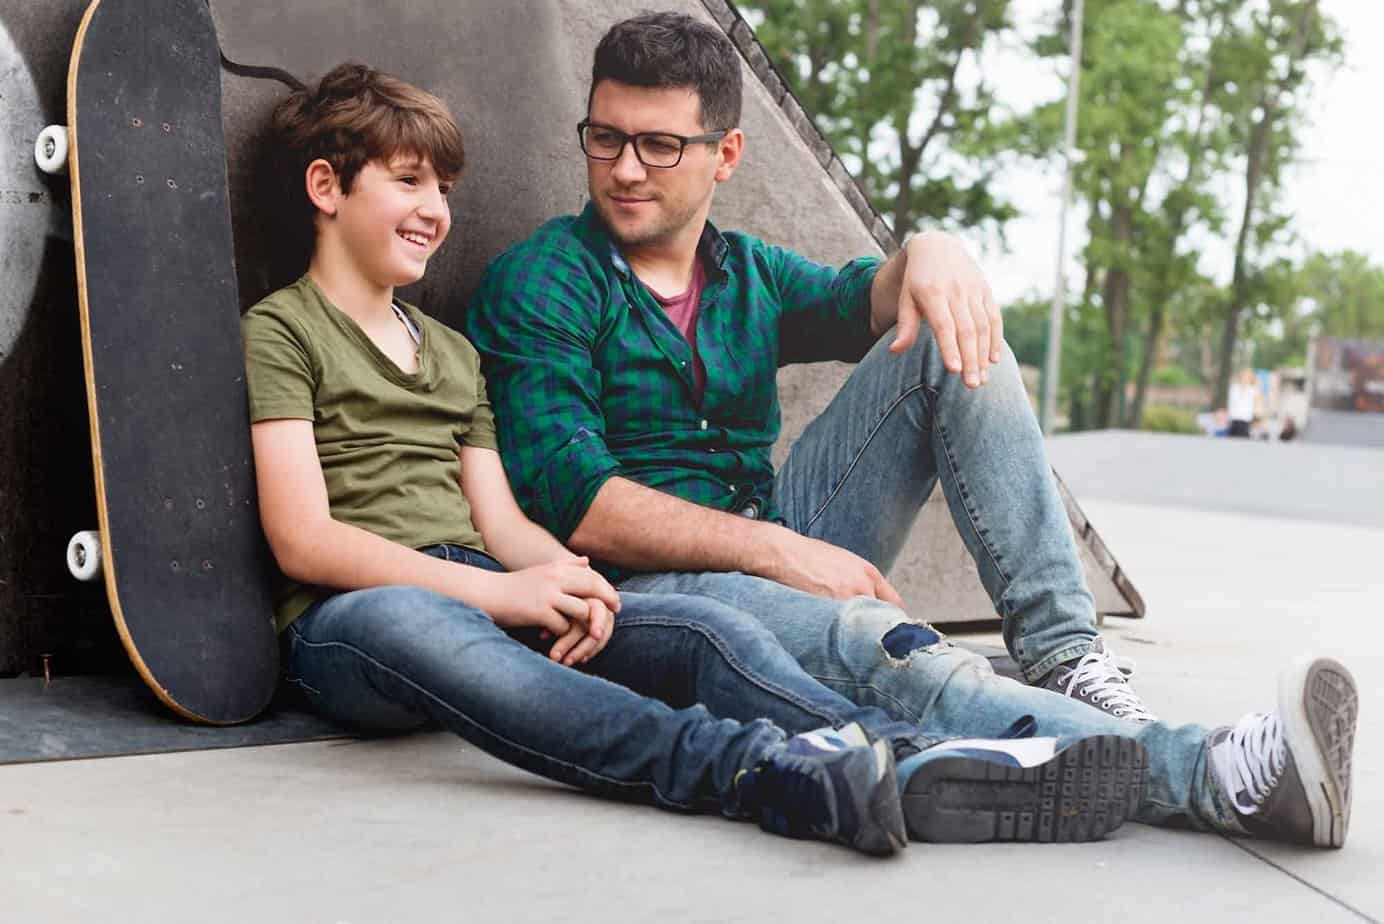 Man and boy sitting next to skateboard in park smiling